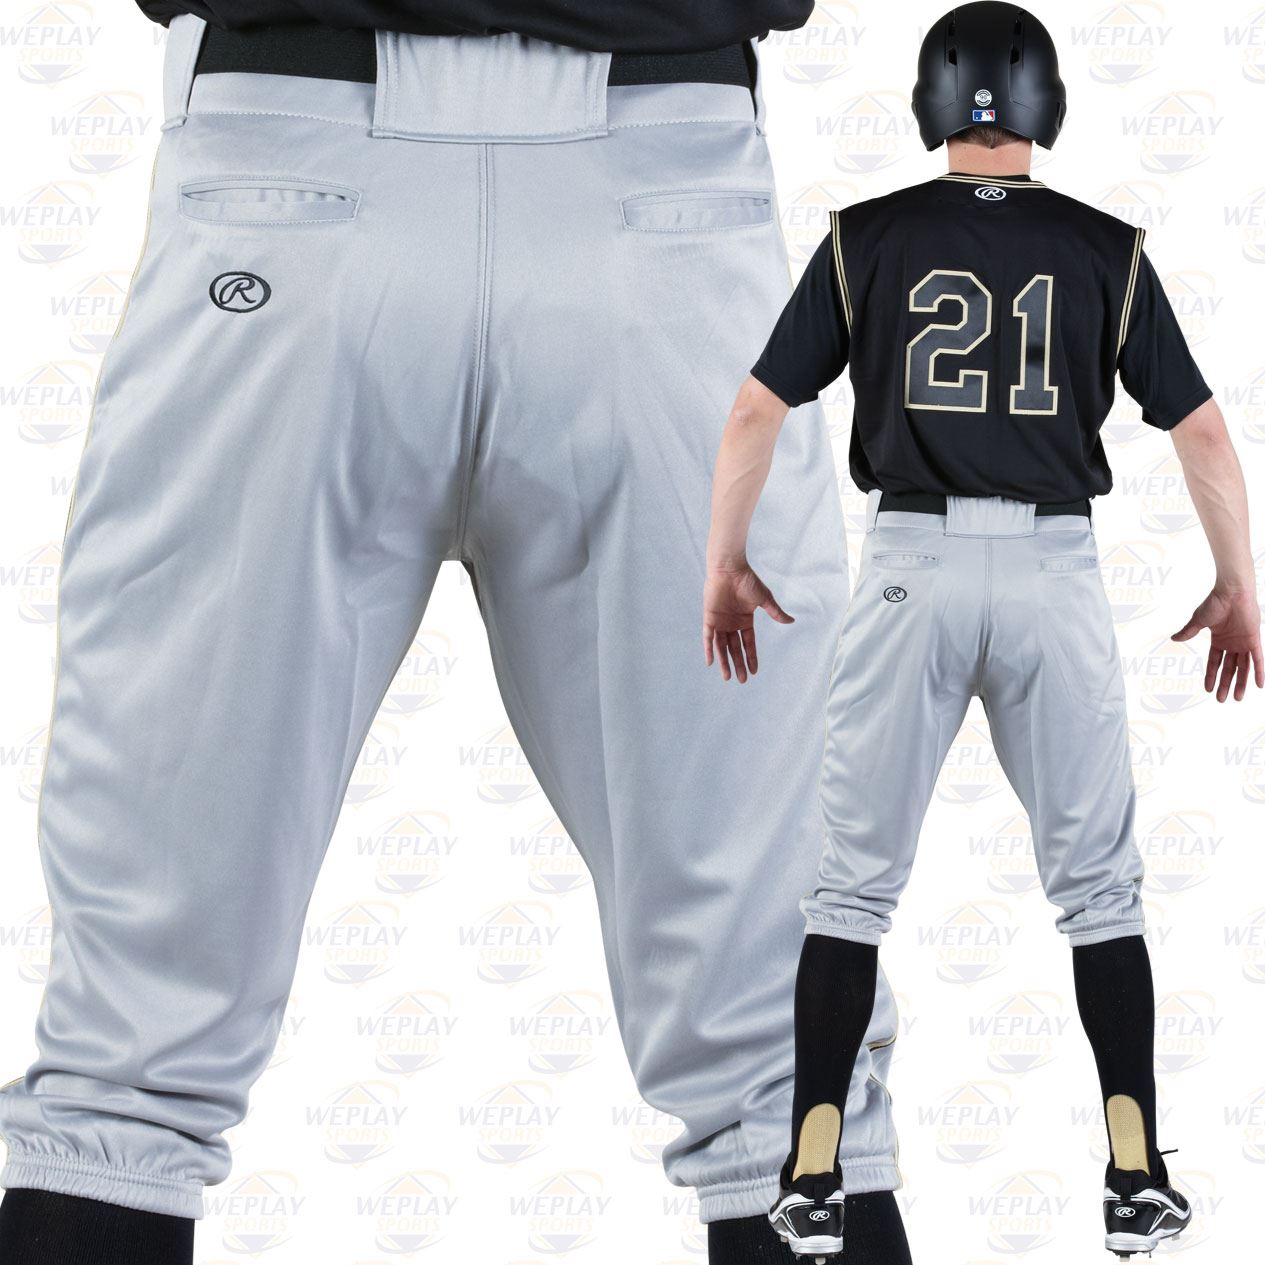 Rawlings Youth Knee-high Knicker Pants YP150K Baseball White Large for sale online 